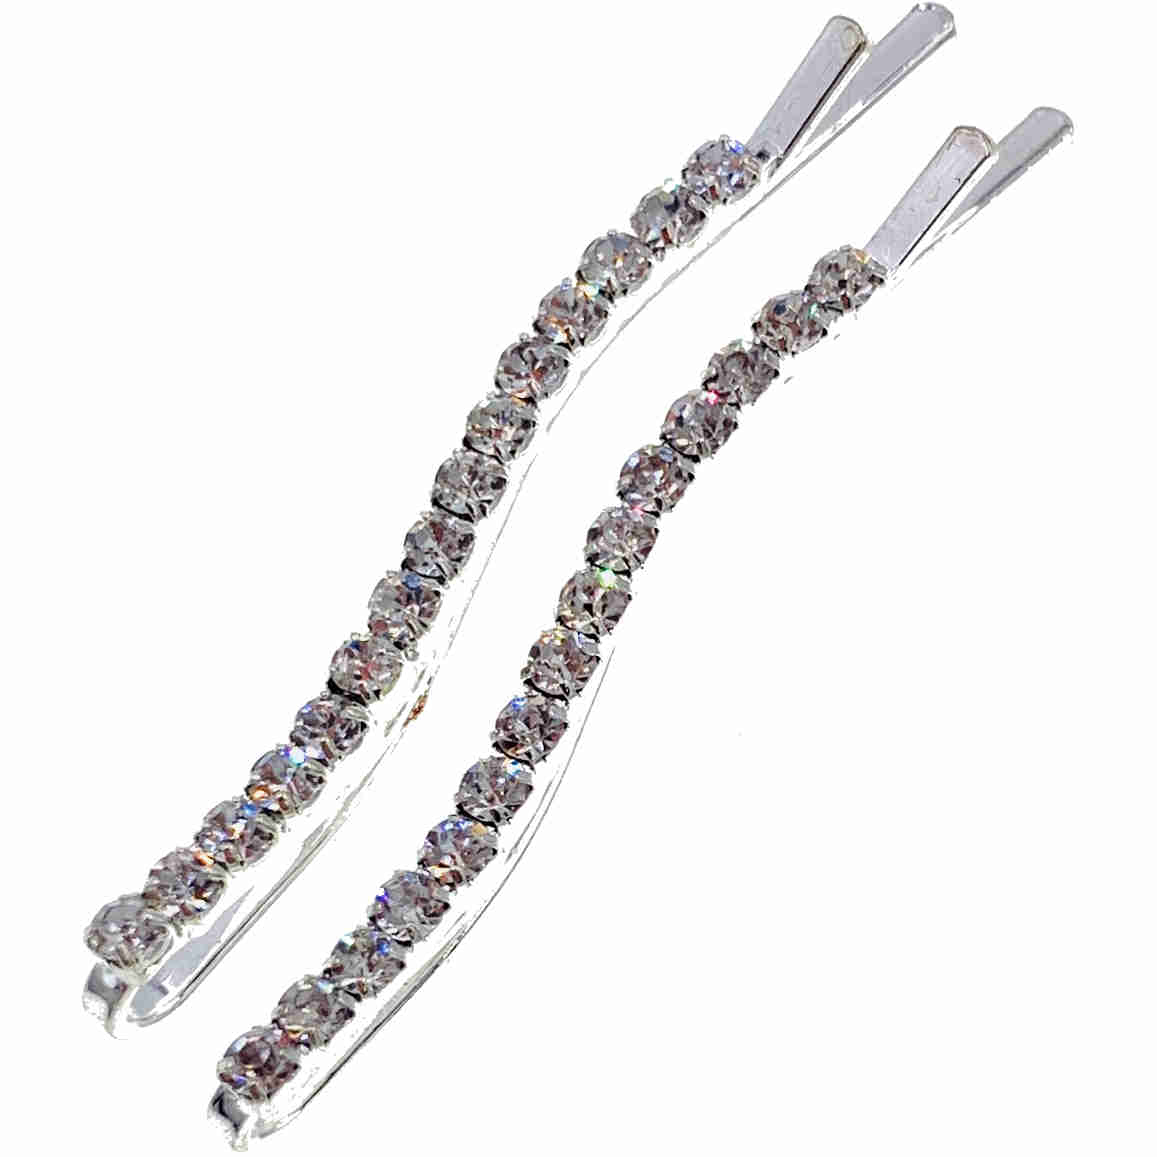 Simple Curving Bobby Pin Pair Rhinestone Crystal Silver Gold (2 colors